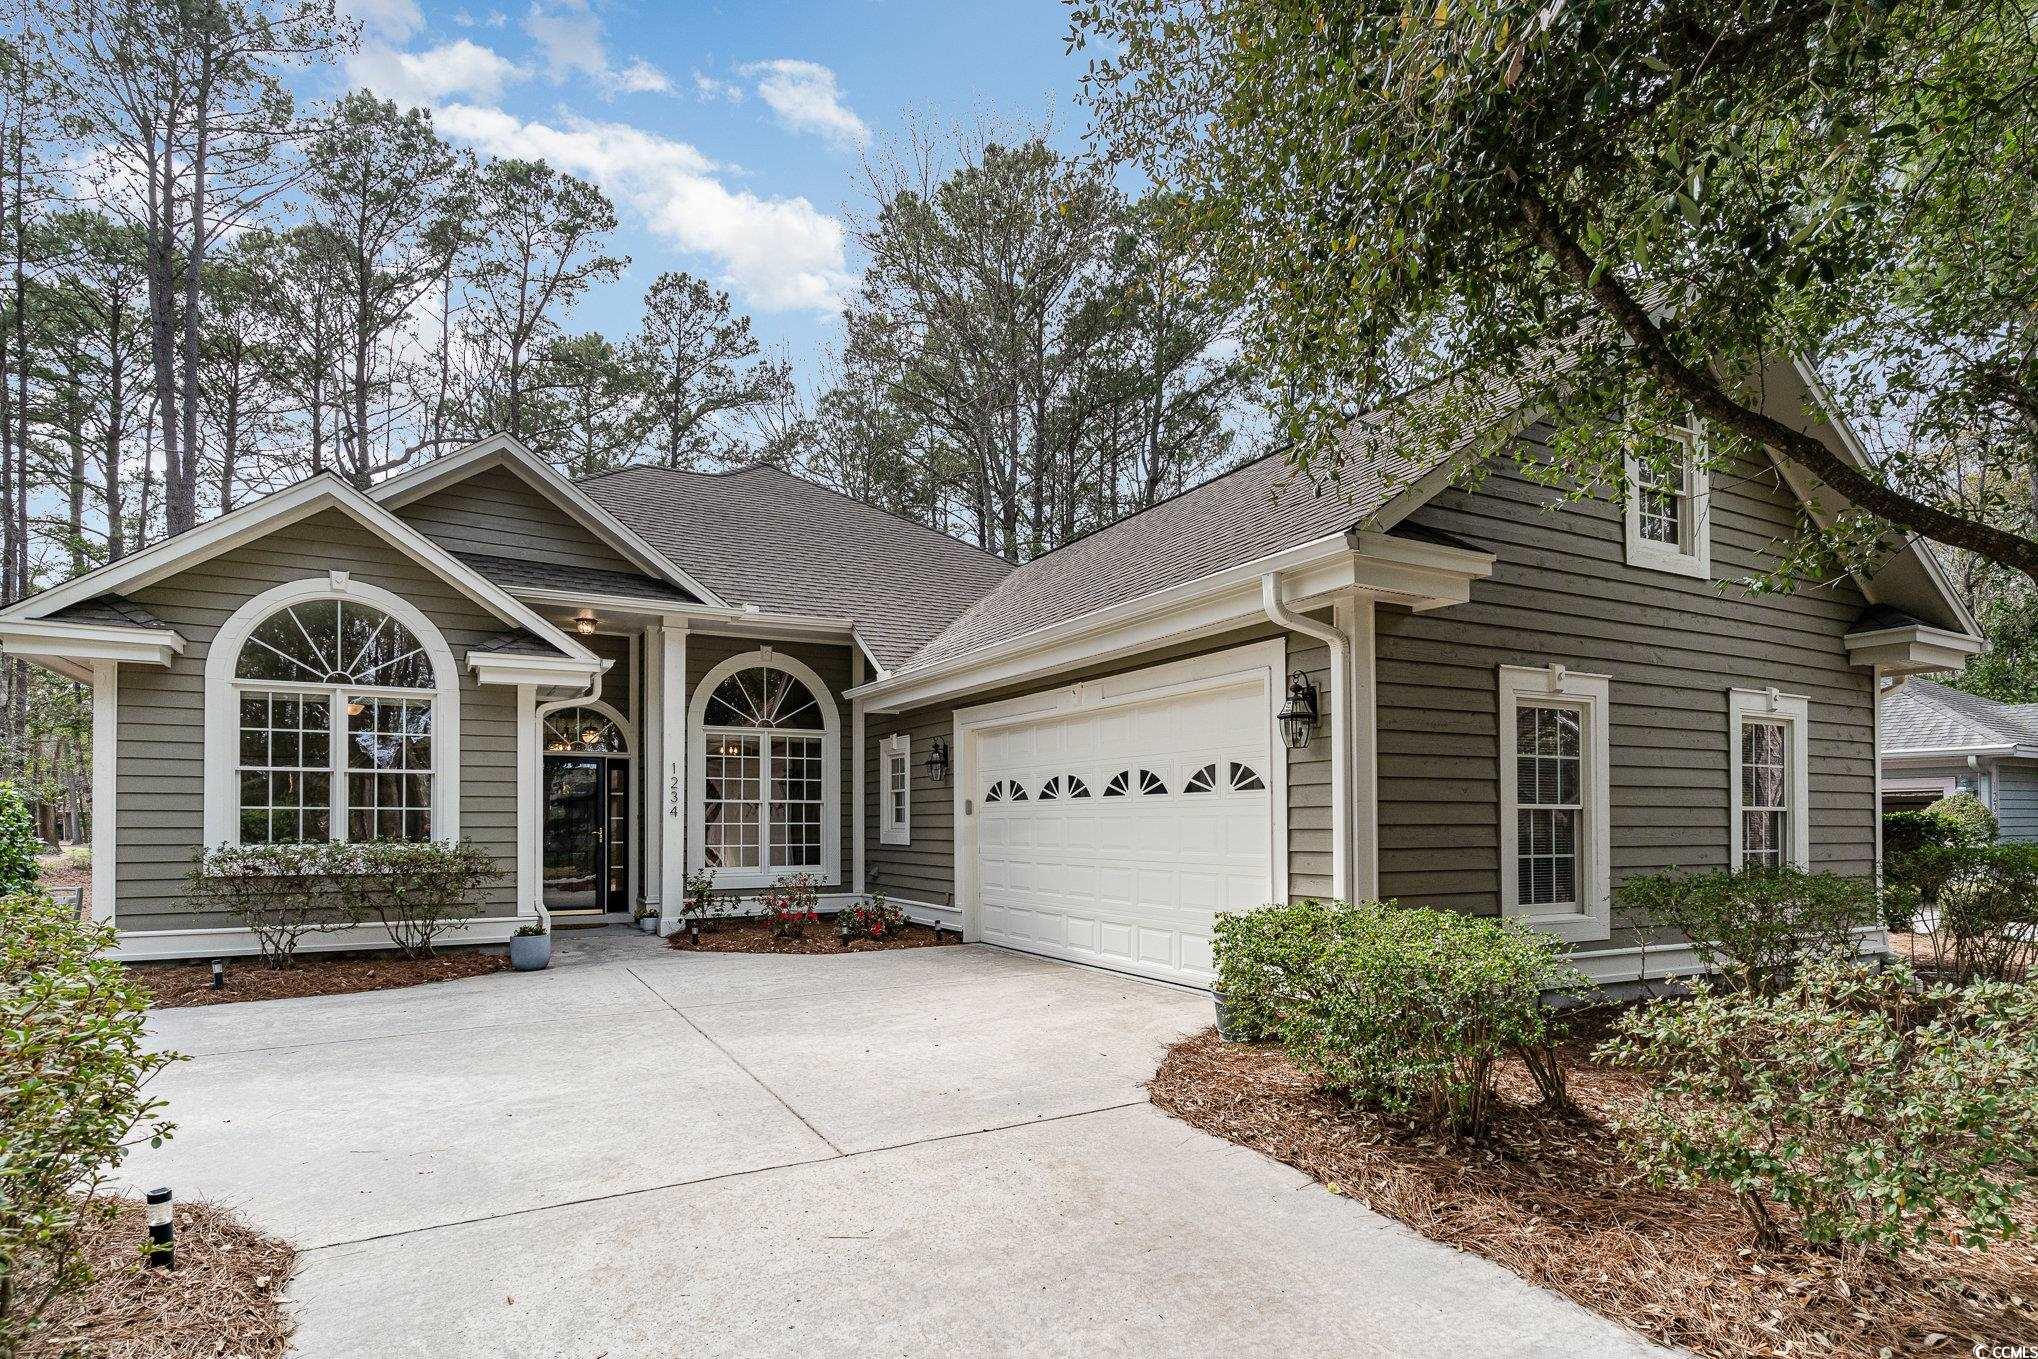 welcome to 1234 clipper rd in the prestigious tidewater plantation in north myrtle beach! this completely remodeled ranch-style home with 3 bedrooms and 2 bathrooms, welcomes an oversized lot for privacy that backs up to the famous tidewater plantation golf course, offering stunning views of the 15th fairway!! the interior and exterior have been beautifully remodeled, freshly painted and gutters on the exterior, while stepping inside offering lvp flooring throughout and new carpet in the bedrooms. you'll love the elegant touches like the 7-inch baseboards and the formal dining room that flows into not one, but two spacious living rooms filled with lots natural light. but let's talk about the kitchen - it's a chef's dream! with quartz countertops, a thor 6 burner dual-fuel range, luxury cabinets, and under cabinet lighting. it has everything you could ever want. plus, there's plenty of countertop and cabinet space for all your cooking needs. the primary suite is a true retreat, with an extended office sitting area, custom doors on the his/her closets, and a dream of a master bathroom with brand new vanities, a tiled shower with all the bells and whistles, and lvp flooring. and let's not forget about the amenities in tidewater plantation - it's an award-winning golf course community with a 24/7 gated entrance, clubhouse, 2 pools, golf shop, fitness center, tennis and pickleball courts, and even an oceanfront cabana for your summer needs. short distance to cherry grove beach, main street, barefoot landing, shops, hospitals, restaurants, shopping and all north myrtle beach has to offer.